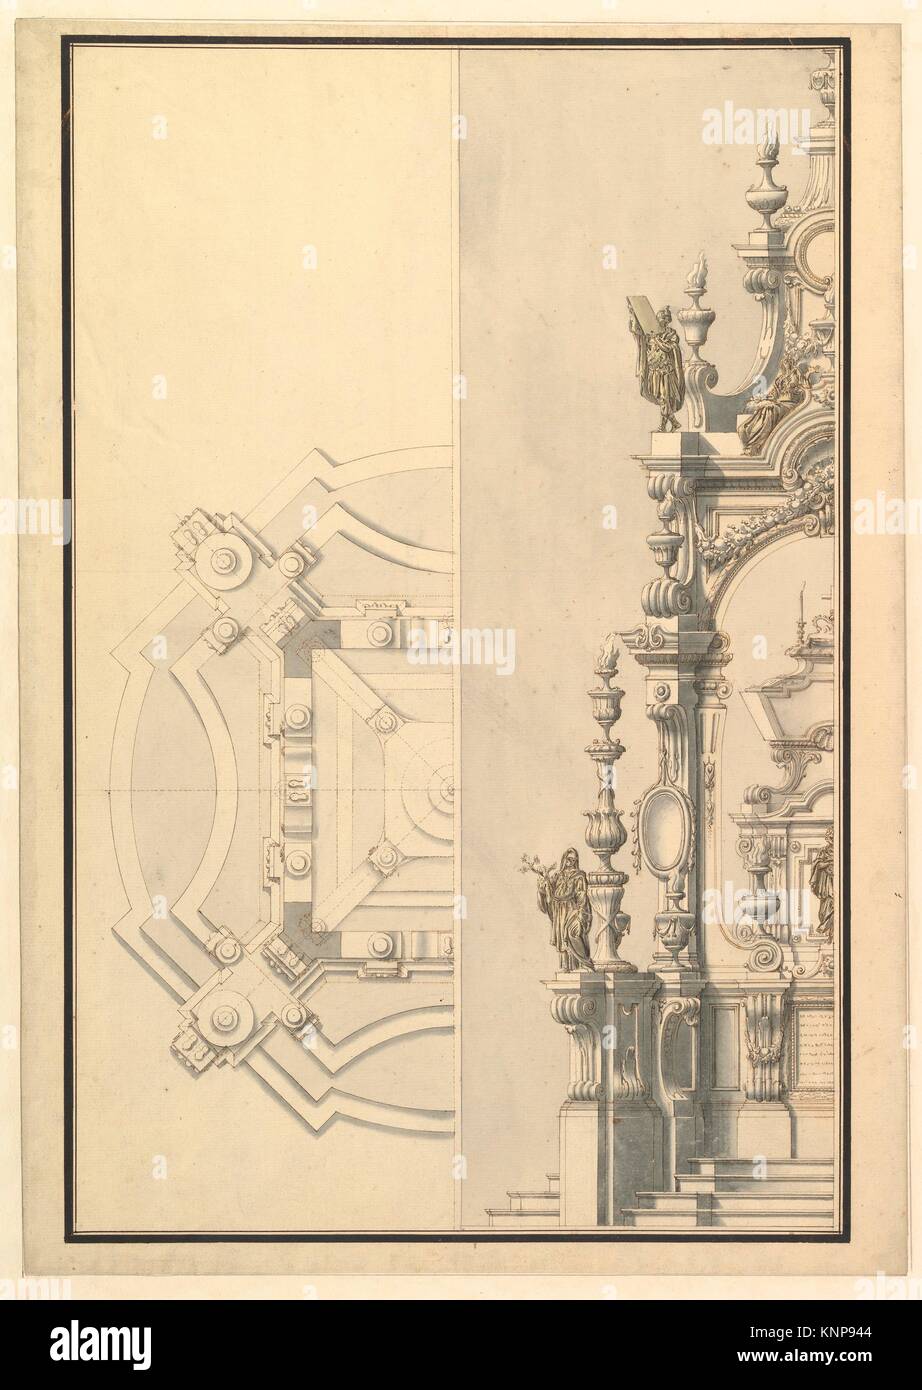 Half Ground Plan and Half Elevation for a Catafalque with Royal Crown Surmounting Casket. Artist: Workshop of Giuseppe Galli Bibiena (Italian, Parma Stock Photo